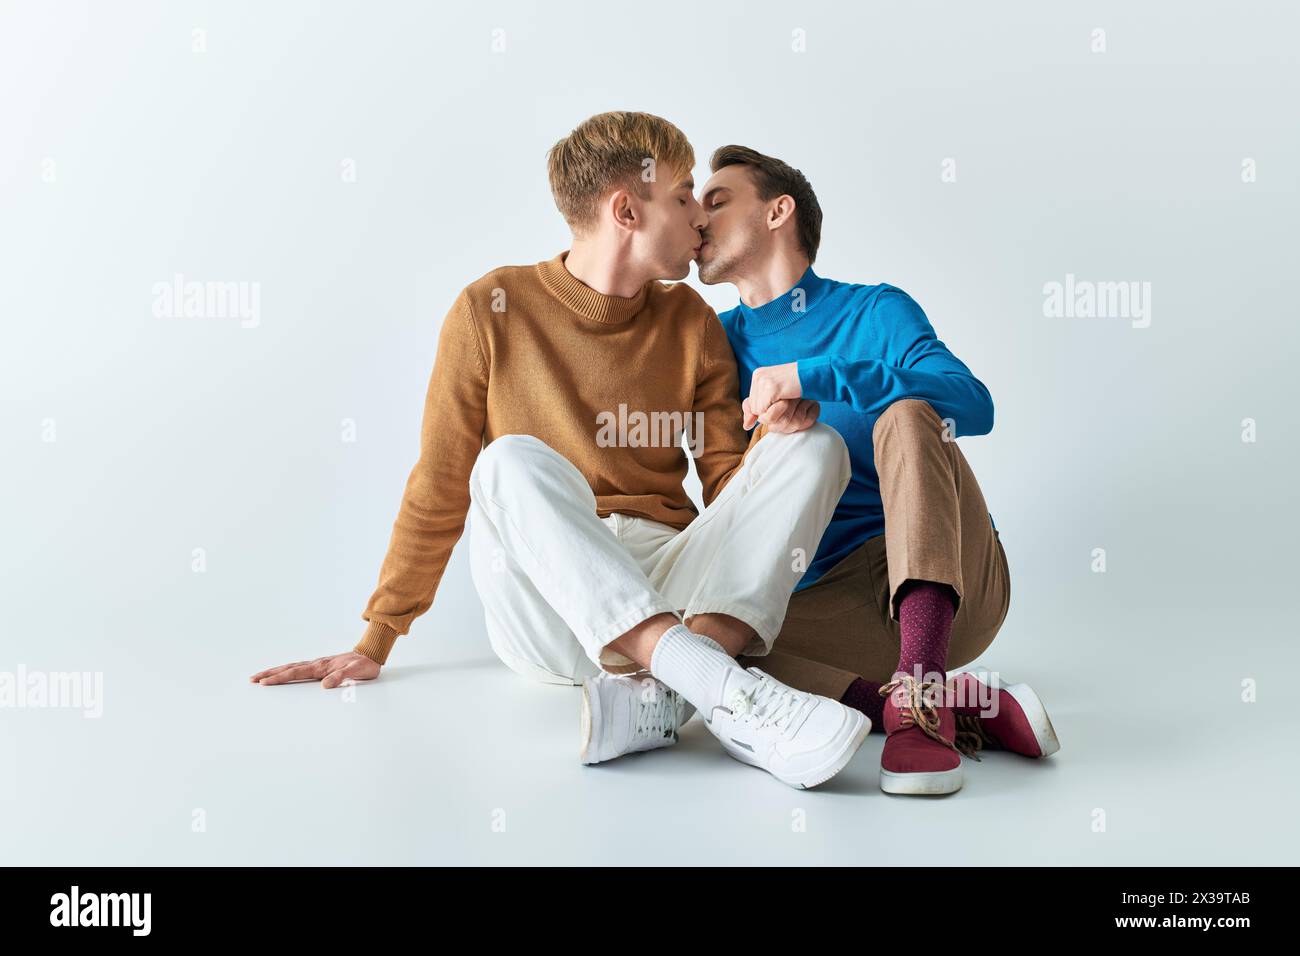 Two young men in casual clothes sitting on the ground kissing each other. Stock Photo